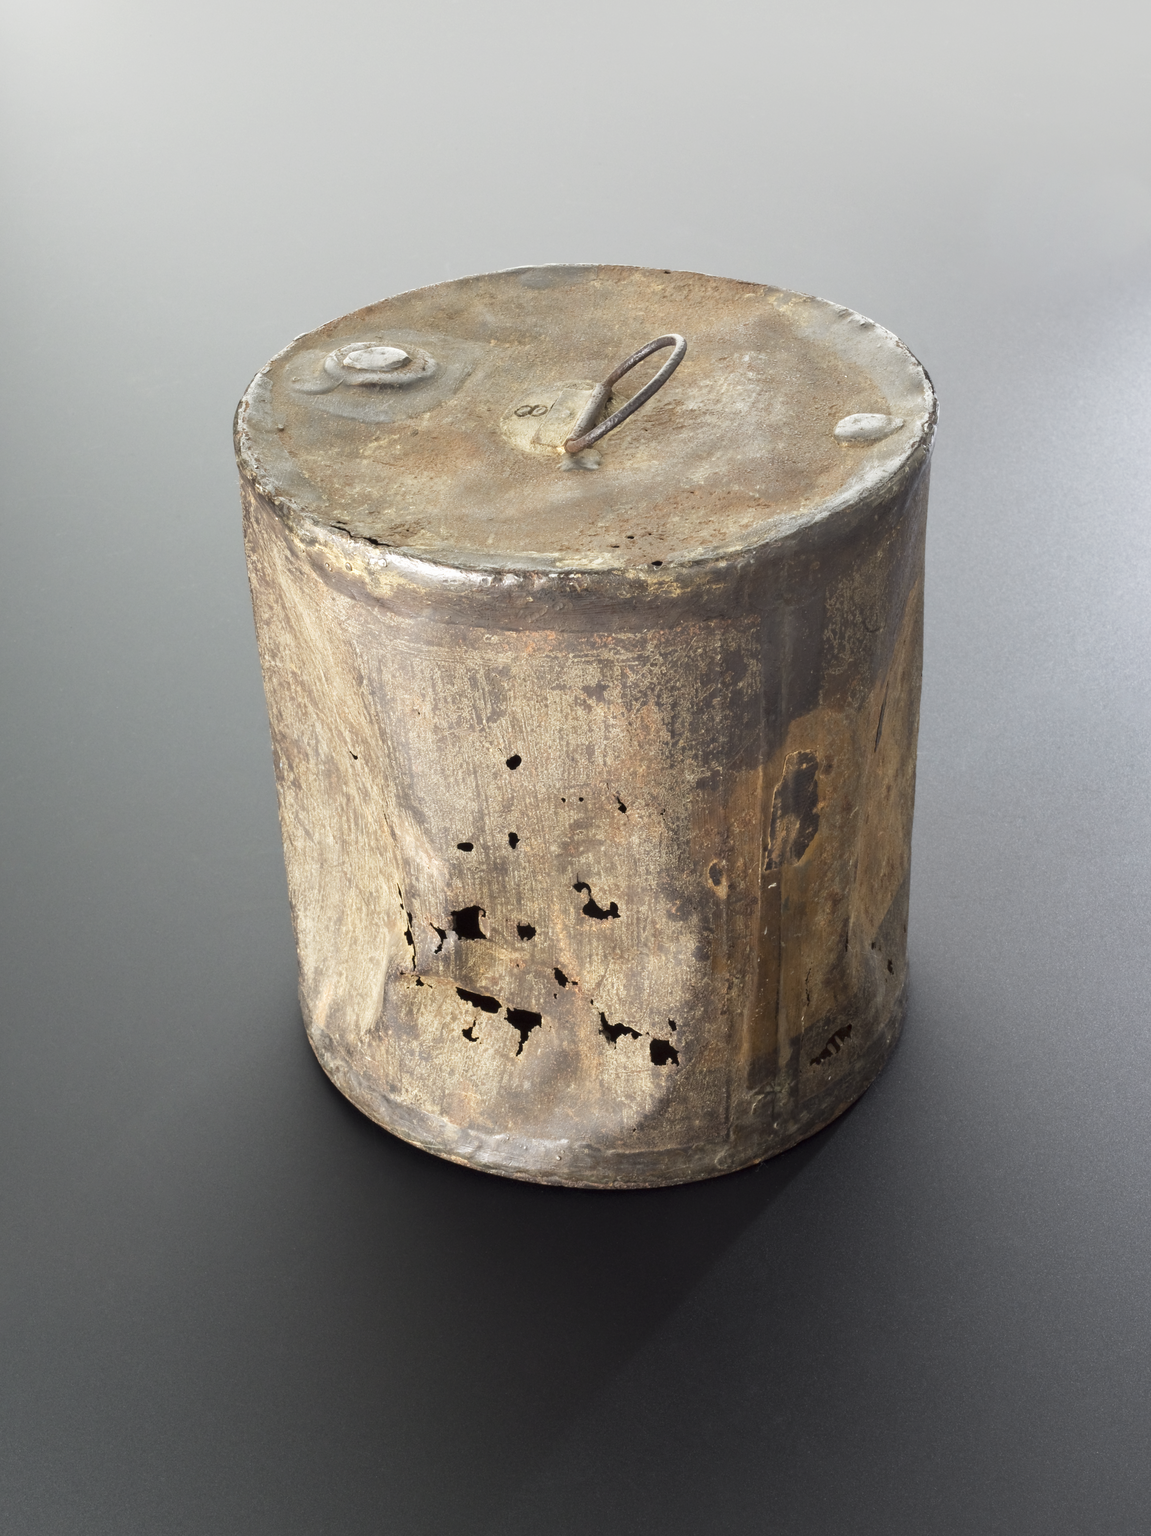 Tin can used for the early preservation of food in 1812.